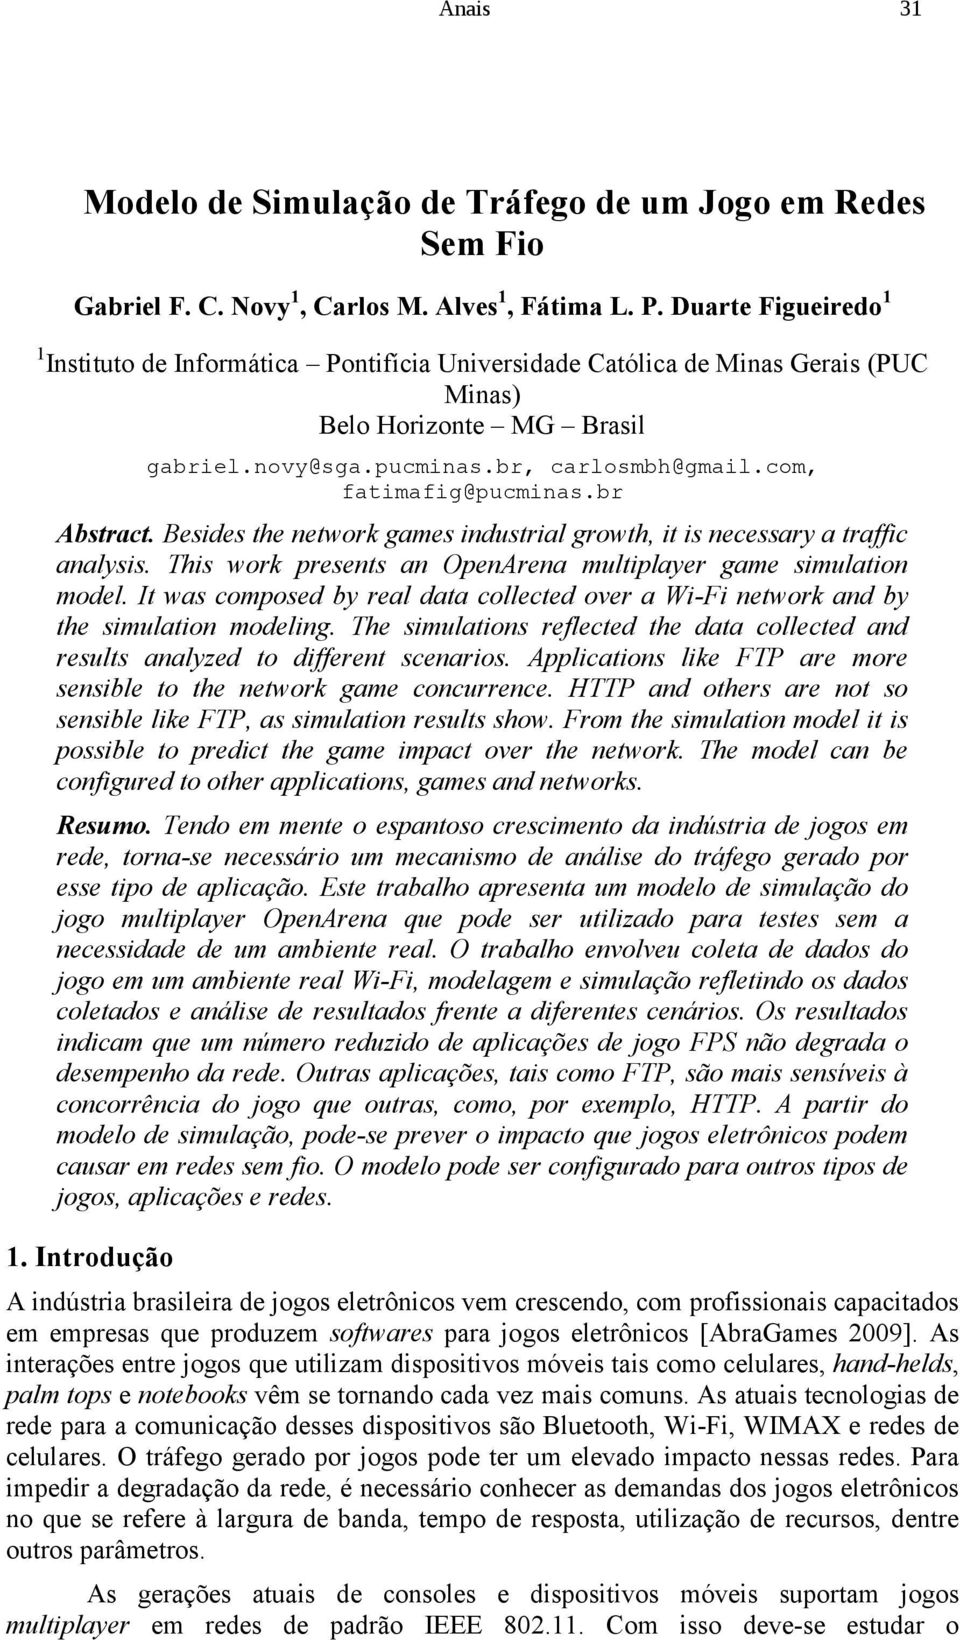 com, fatimafig@pucminas.br Abstract. Besides the network games industrial growth, it is necessary a traffic analysis. This work presents an OpenArena multiplayer game simulation model.